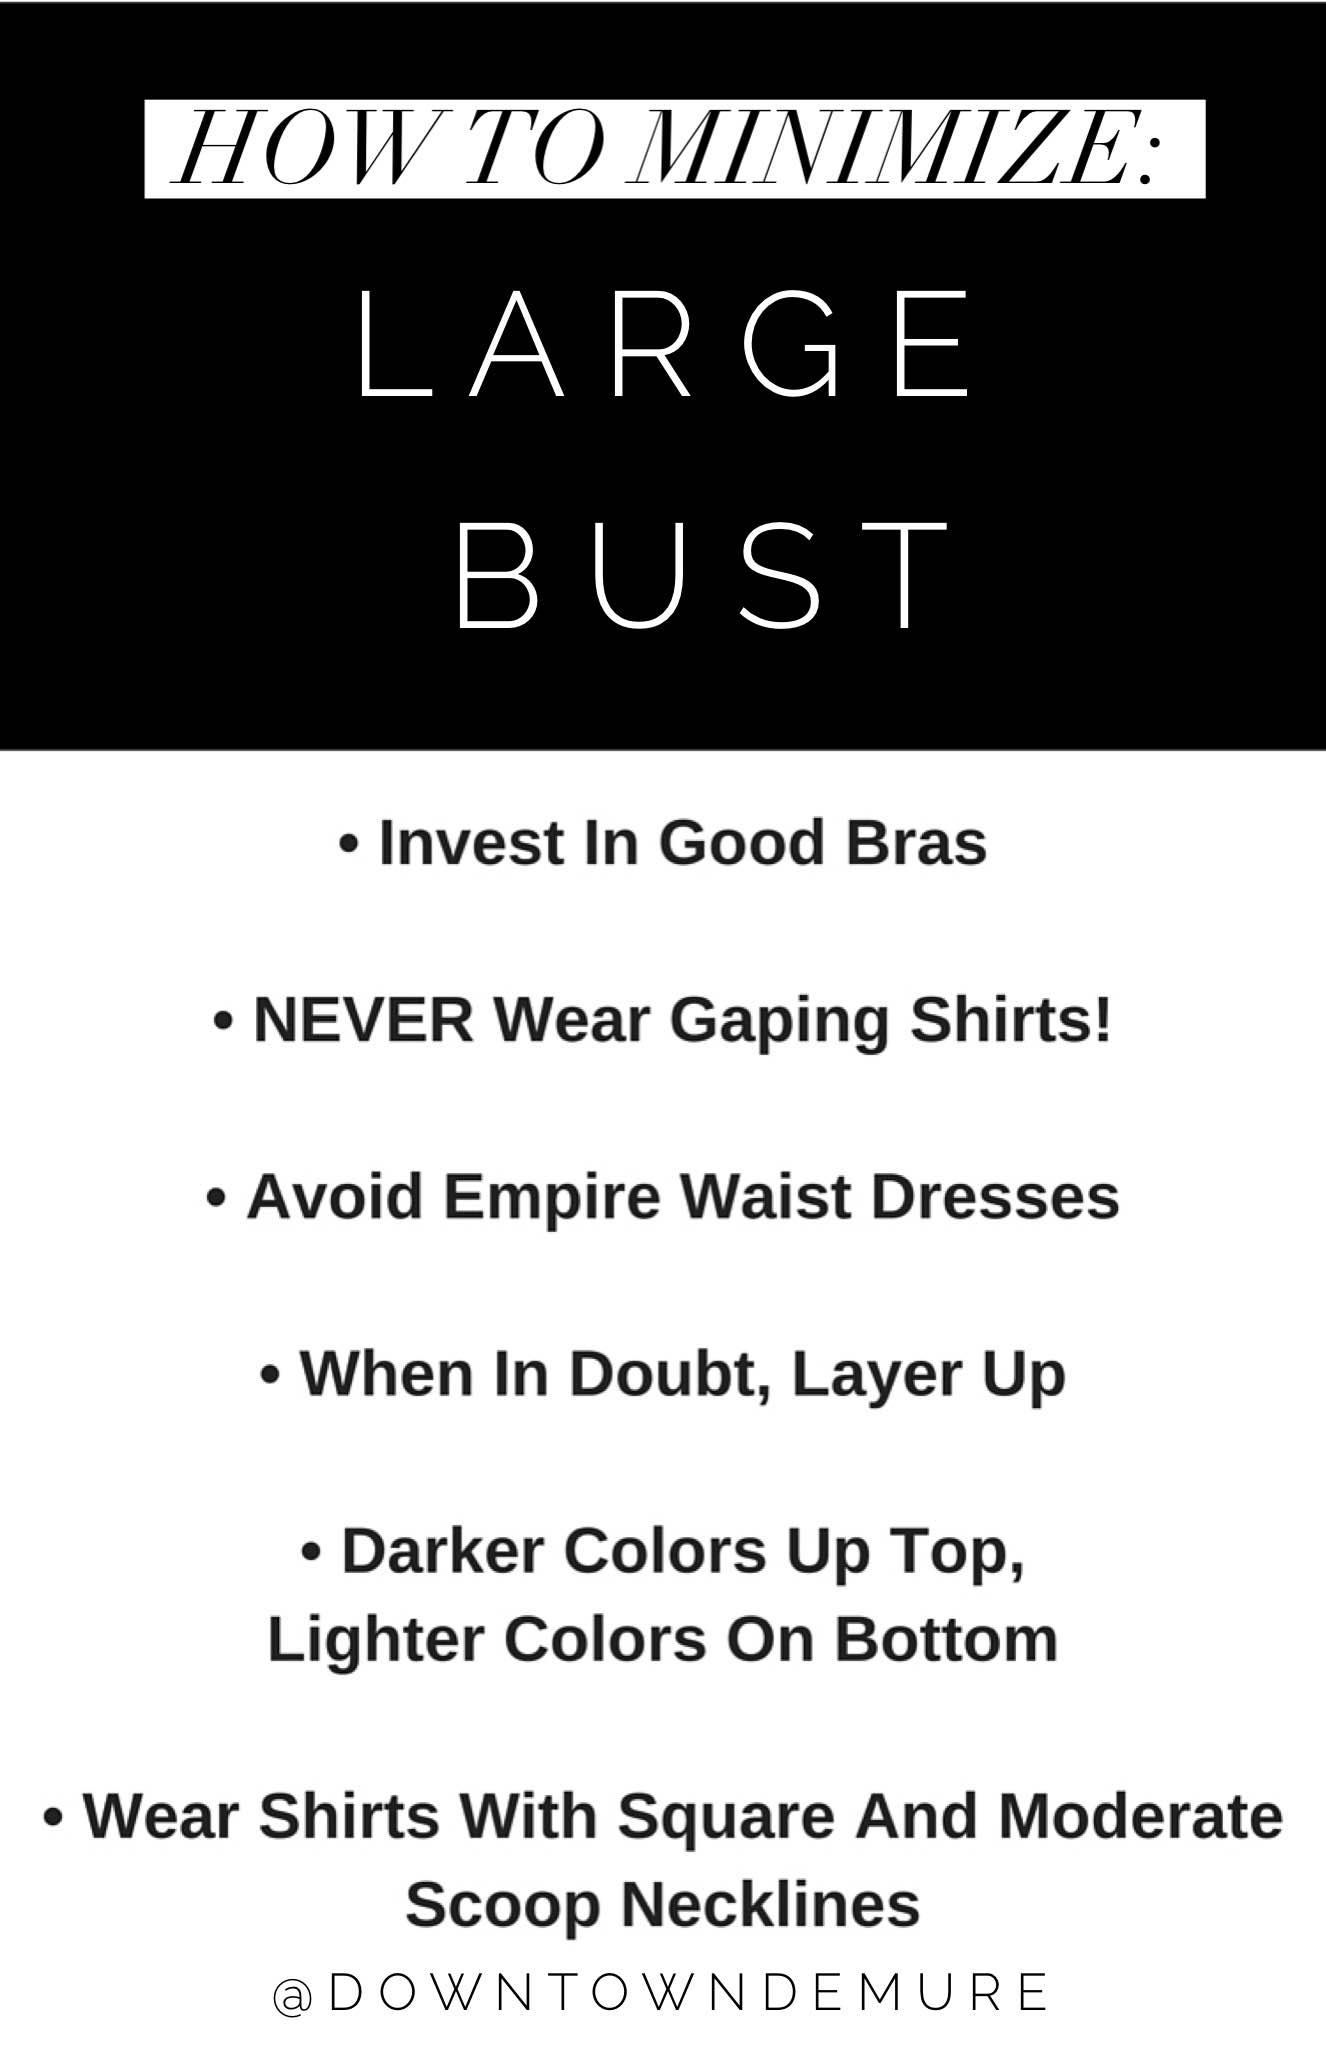 How to Minimize Large Bust - Downtown Demure